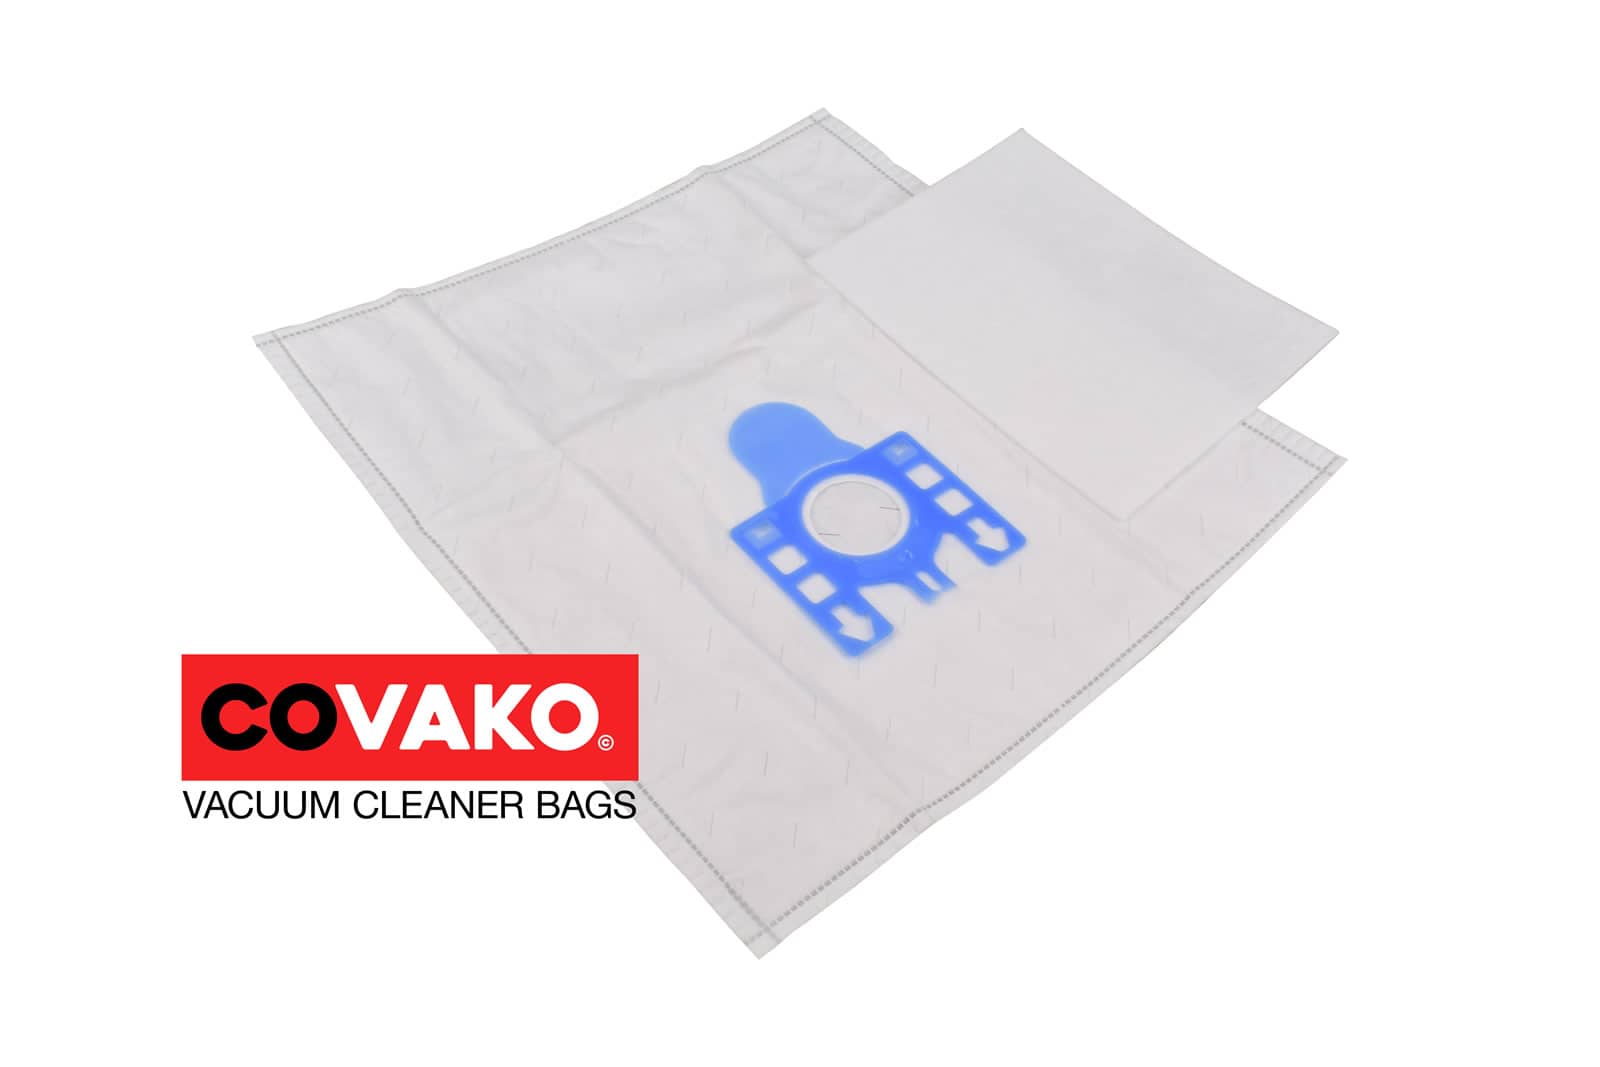 Electrolux CE Compact-Vampyr / Synthesis - Electrolux vacuum cleaner bags